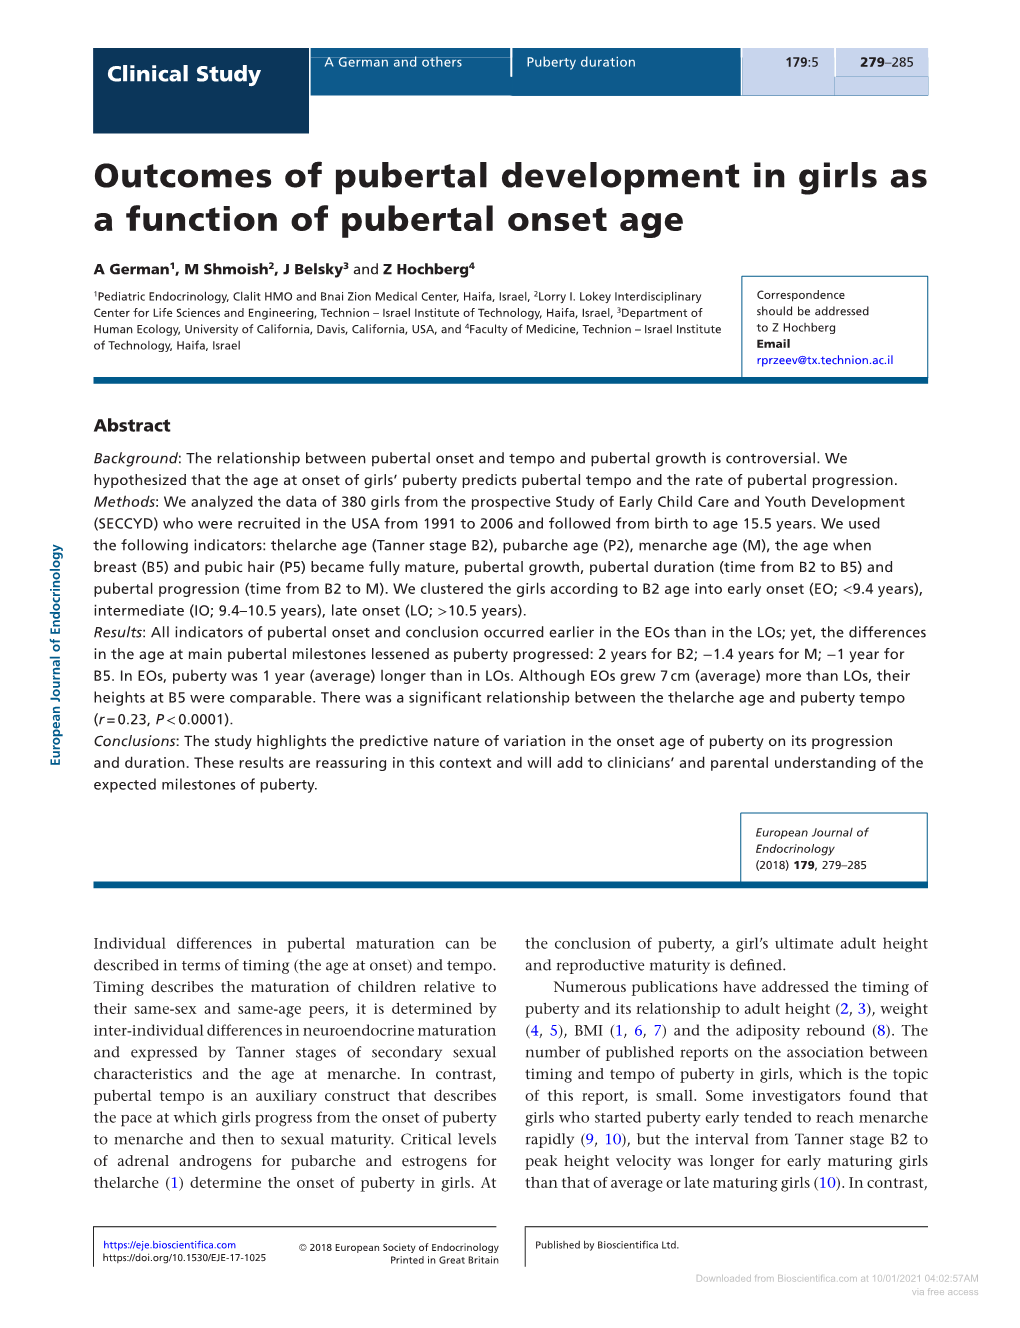 Outcomes of Pubertal Development in Girls As a Function of Pubertal Onset